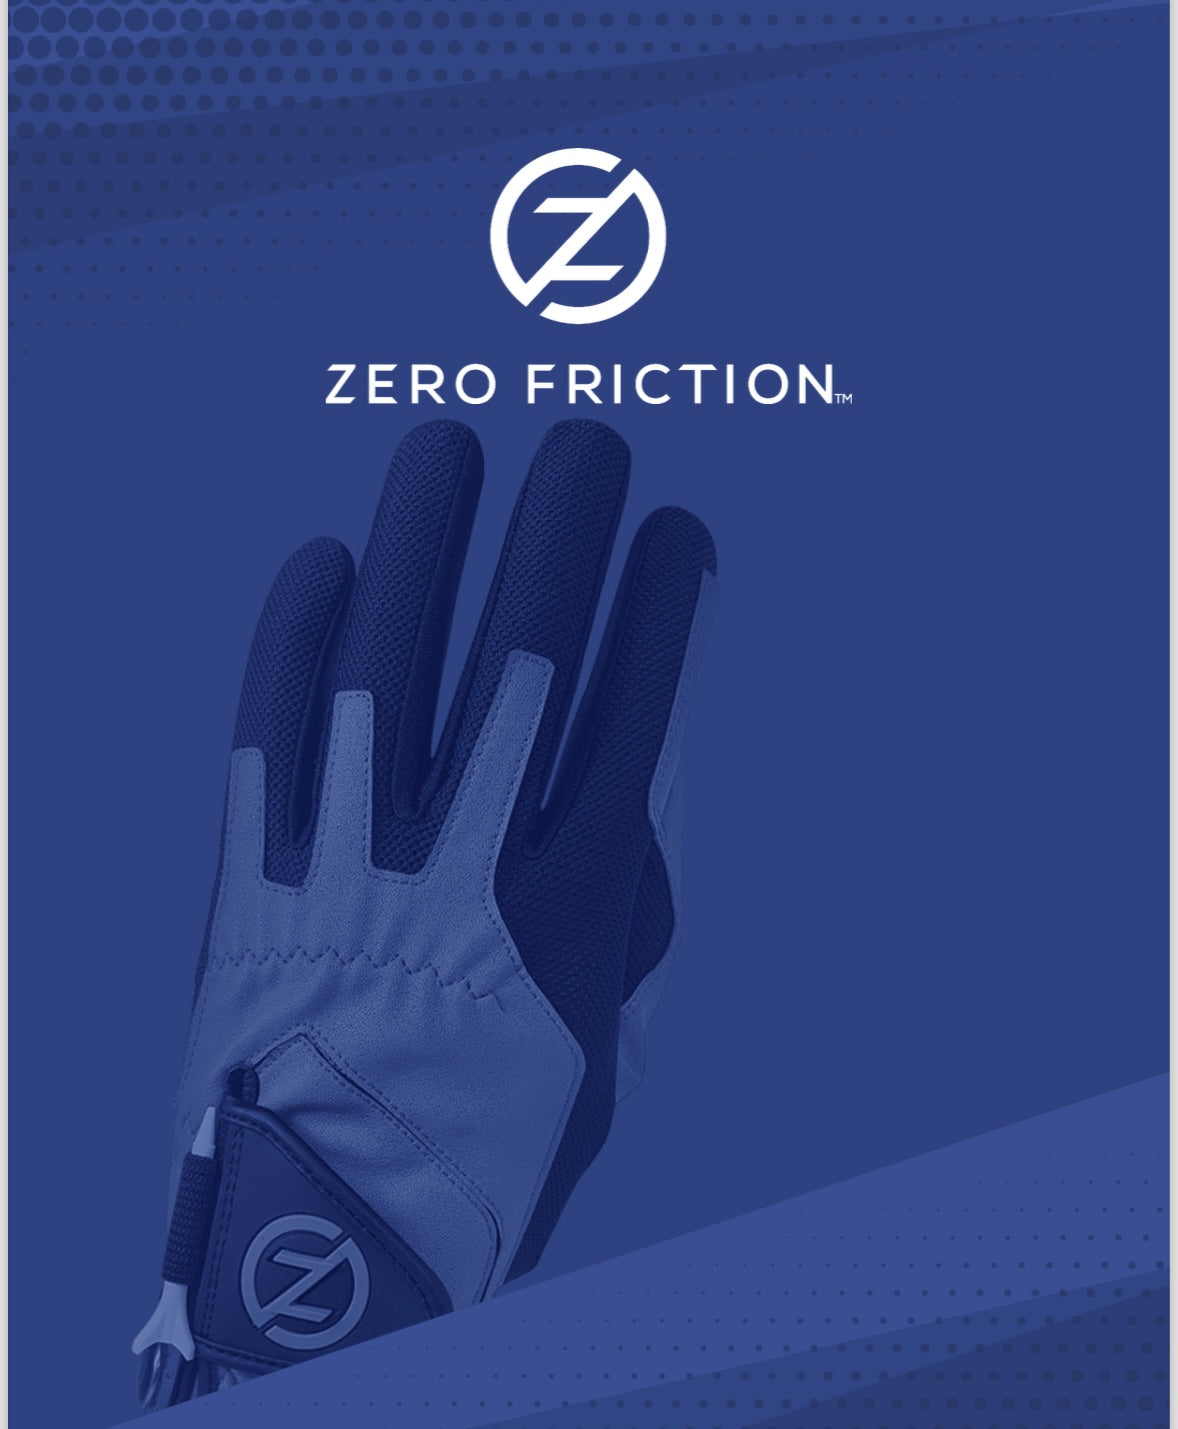 ZERO FRICTION MEN’S STORM &
RAIN GLOVE. COMES IN PAIRS AND FREE HYBRID TEE & BALL MARKER